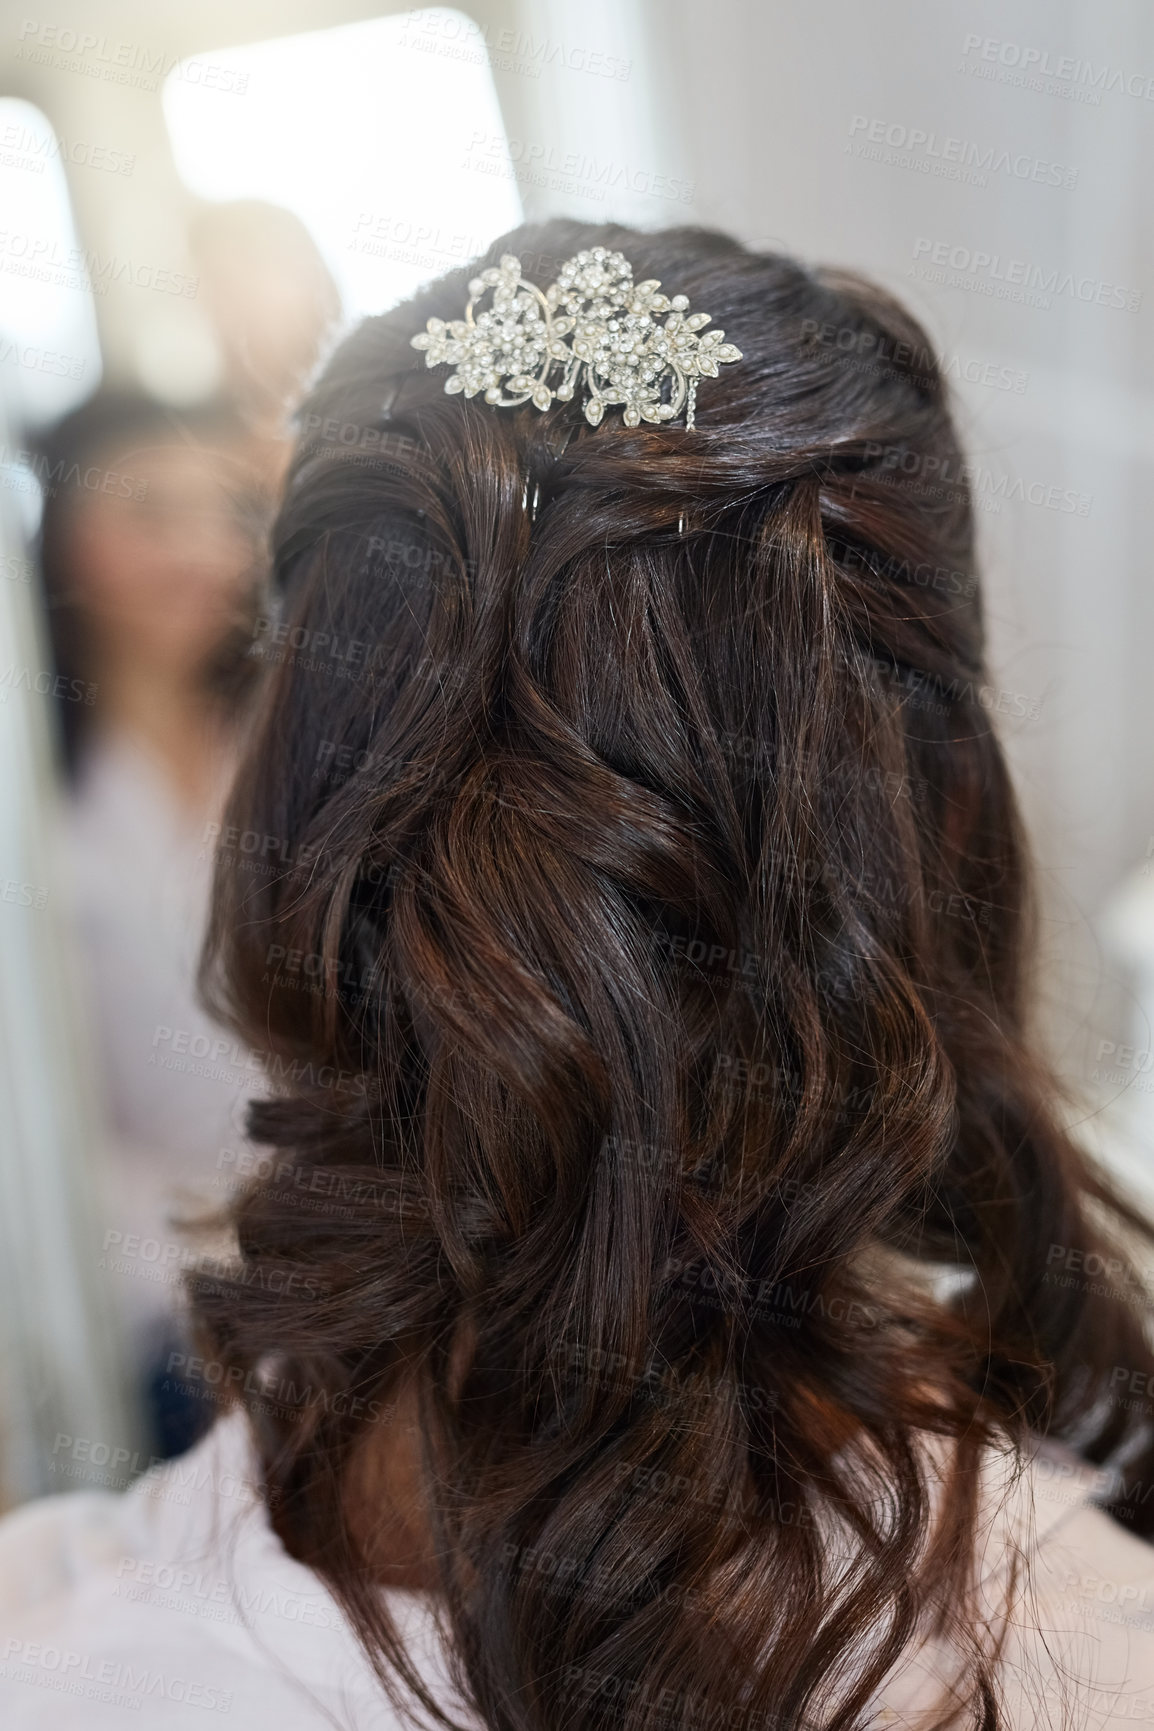 Buy stock photo Rearview shot of a woman's hairdo on her wedding day